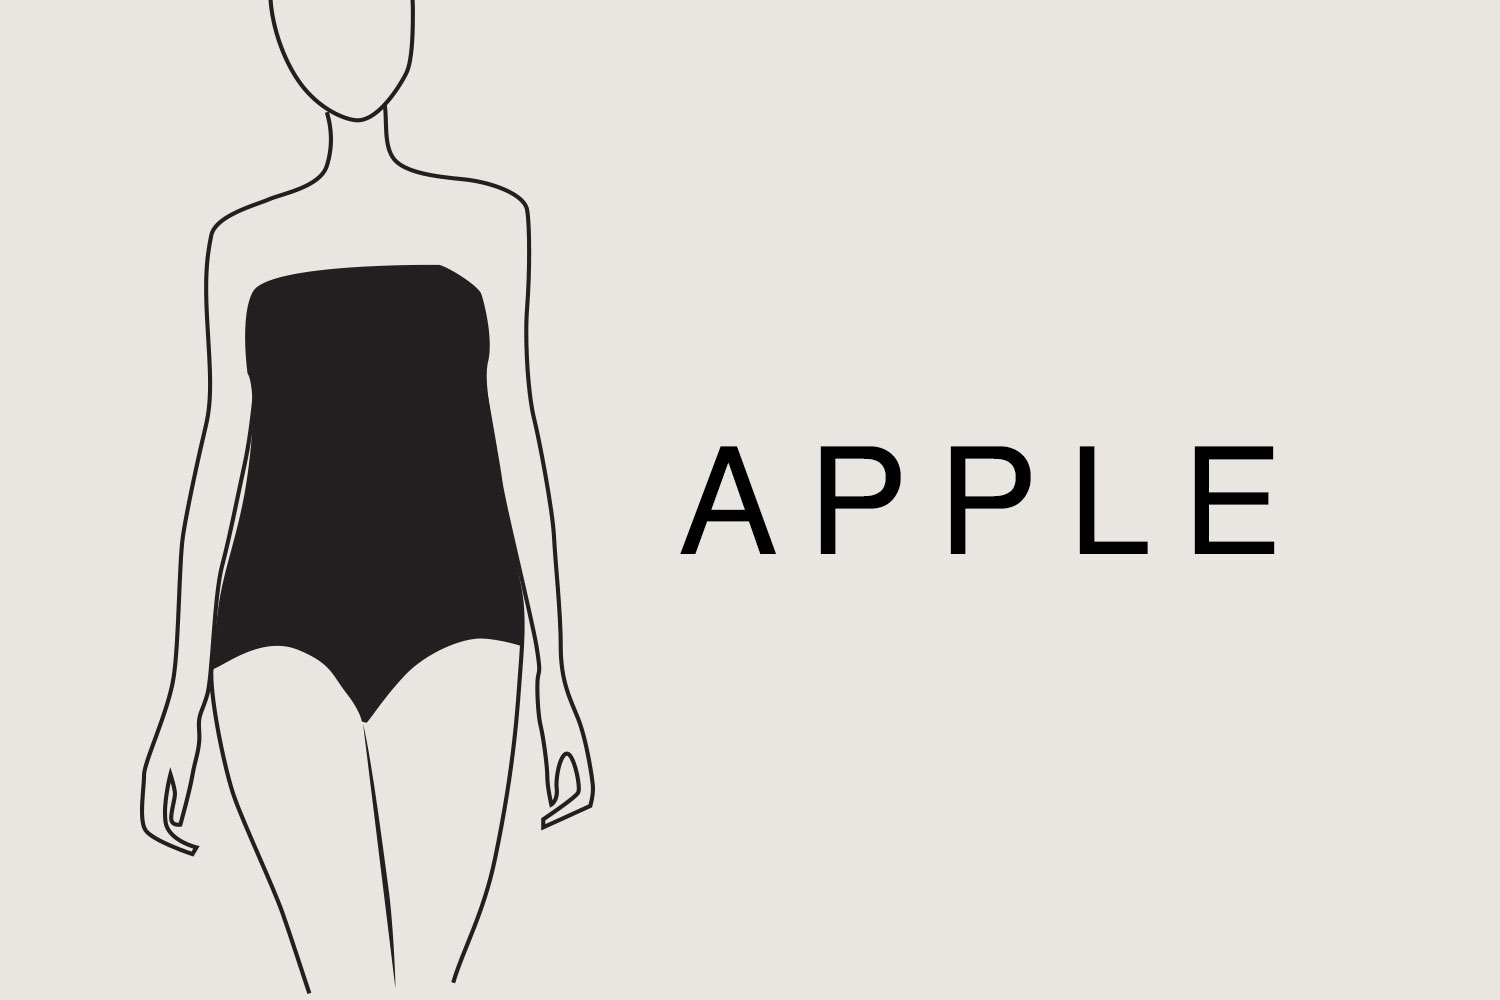 GAIA Bespoke - If you have an apple-shaped body, then your body is